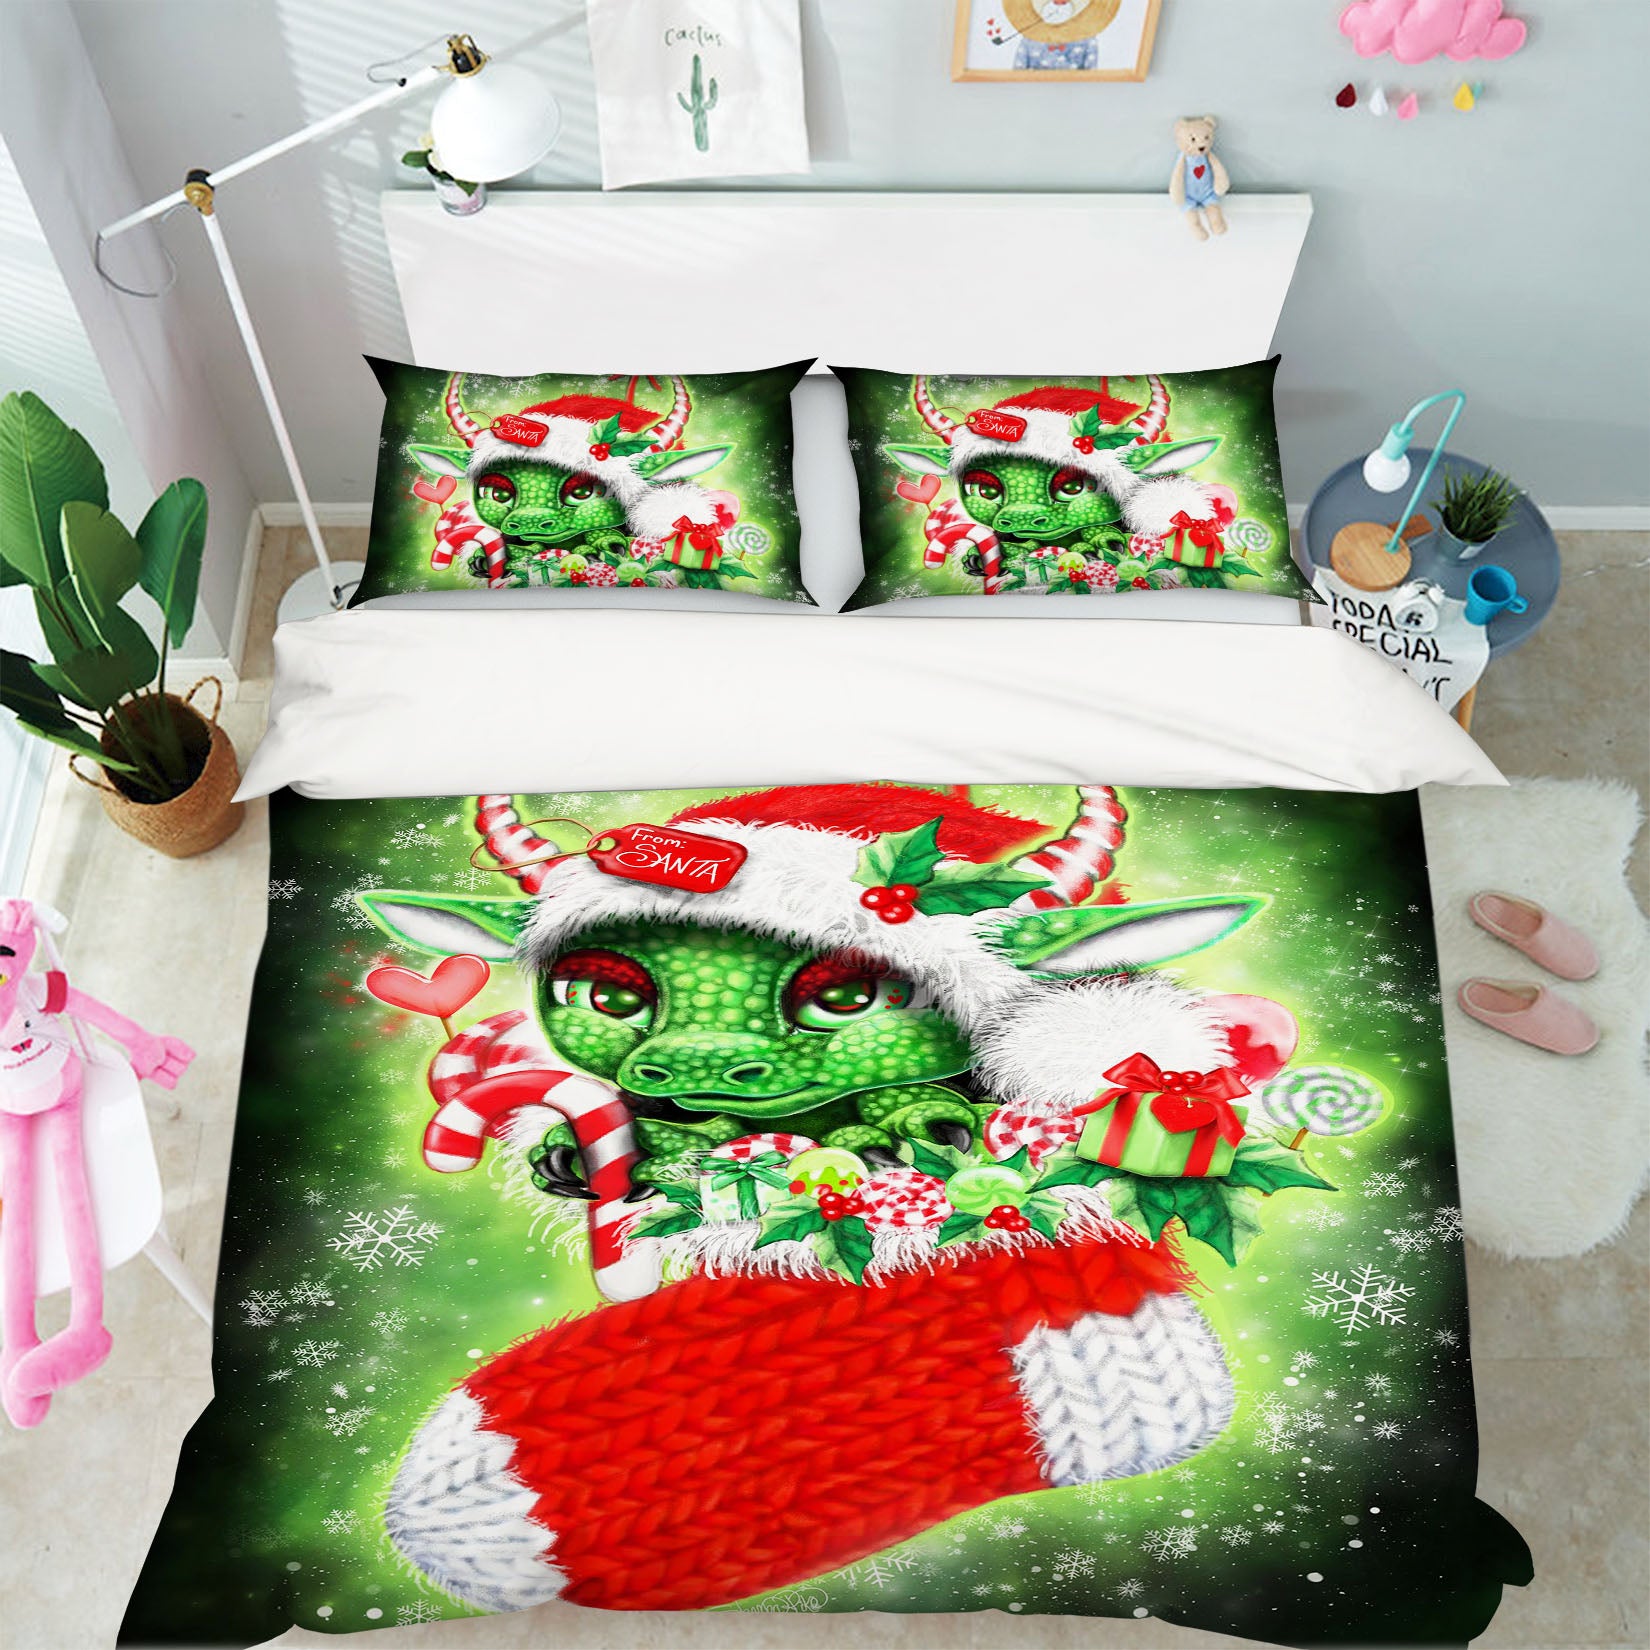 3D Christmas Dragon 8611 Sheena Pike Bedding Bed Pillowcases Quilt Cover Duvet Cover